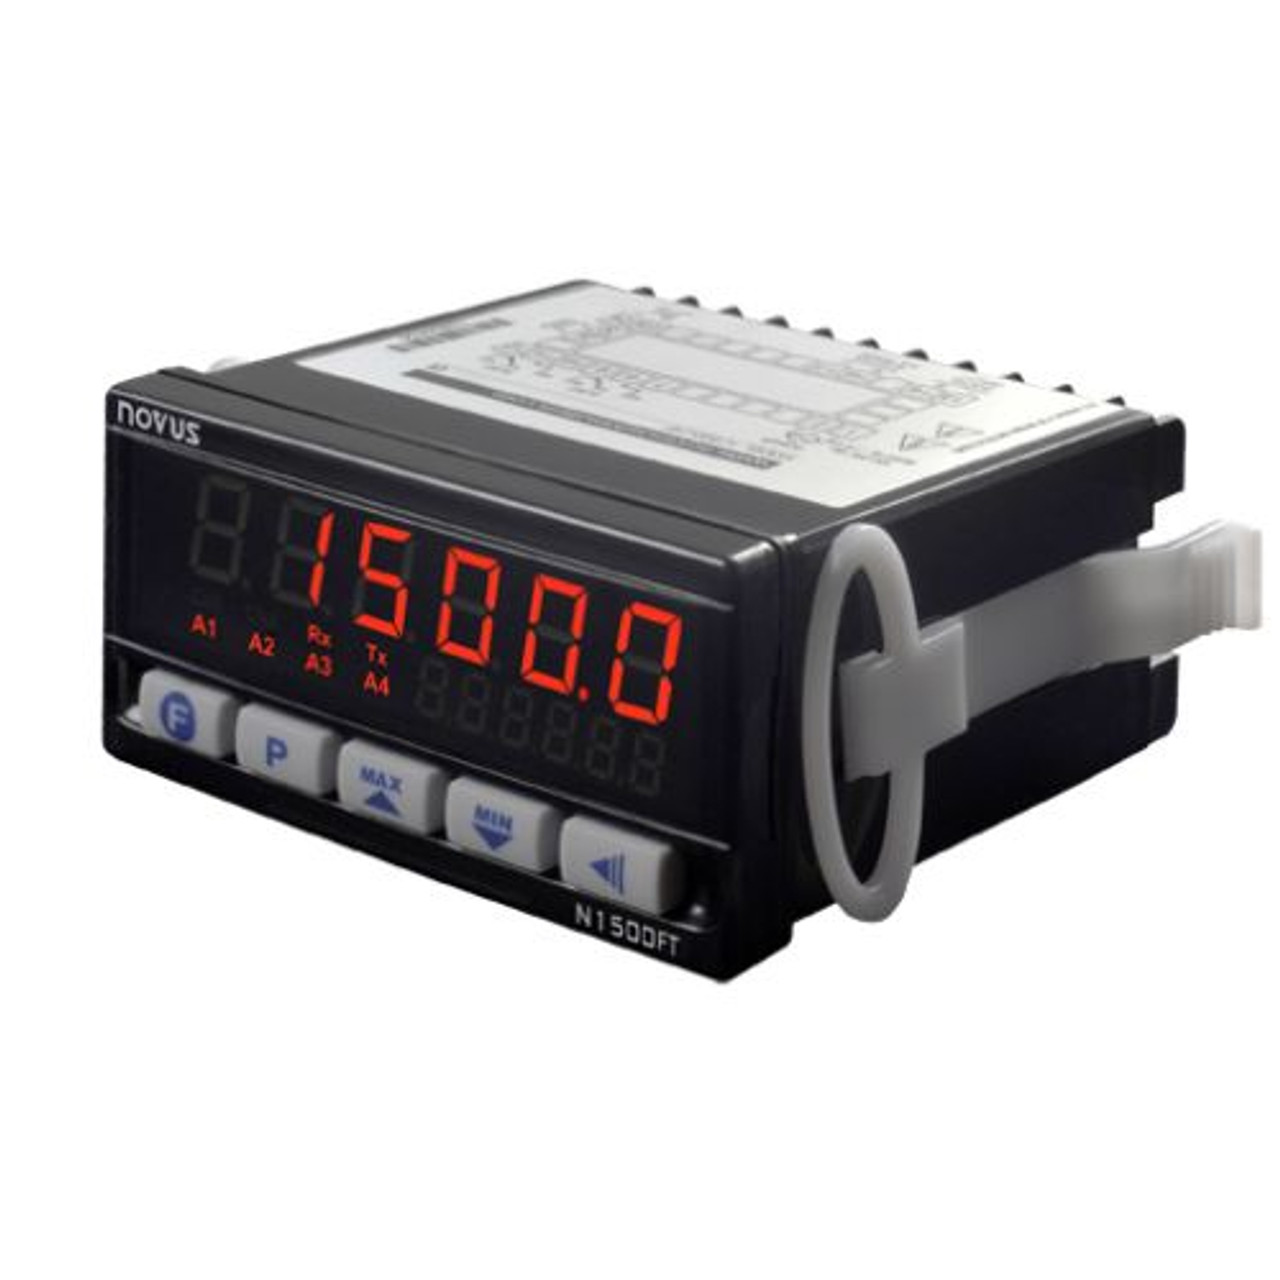 N1500 FT 24V Flow rate indicator, 2 relays out